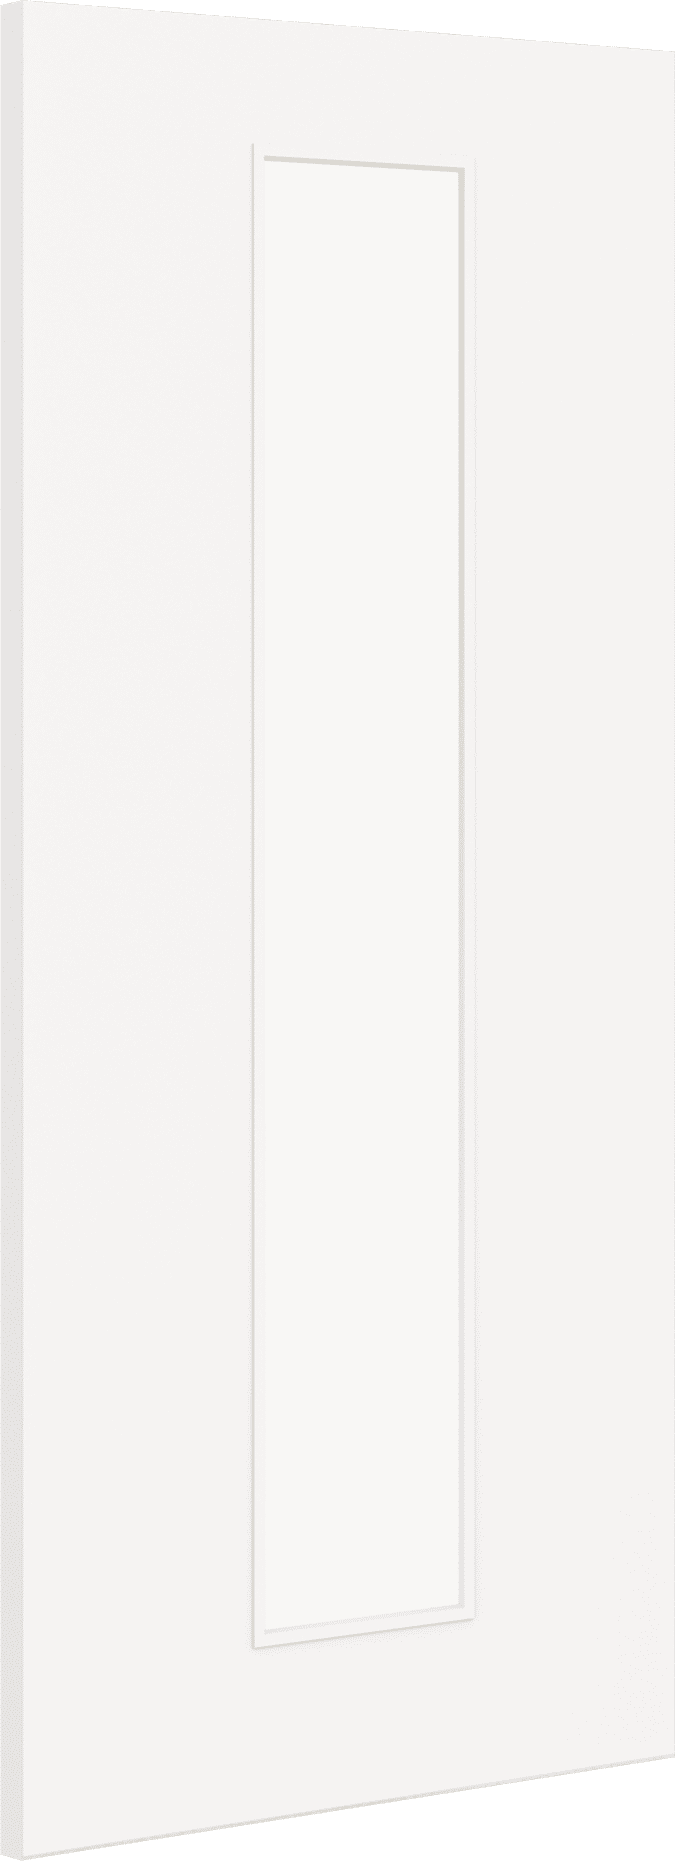 2040mm x 626mm x 44mm Architectural Paint Grade White 10 Clear Glazed Fire Door Blank